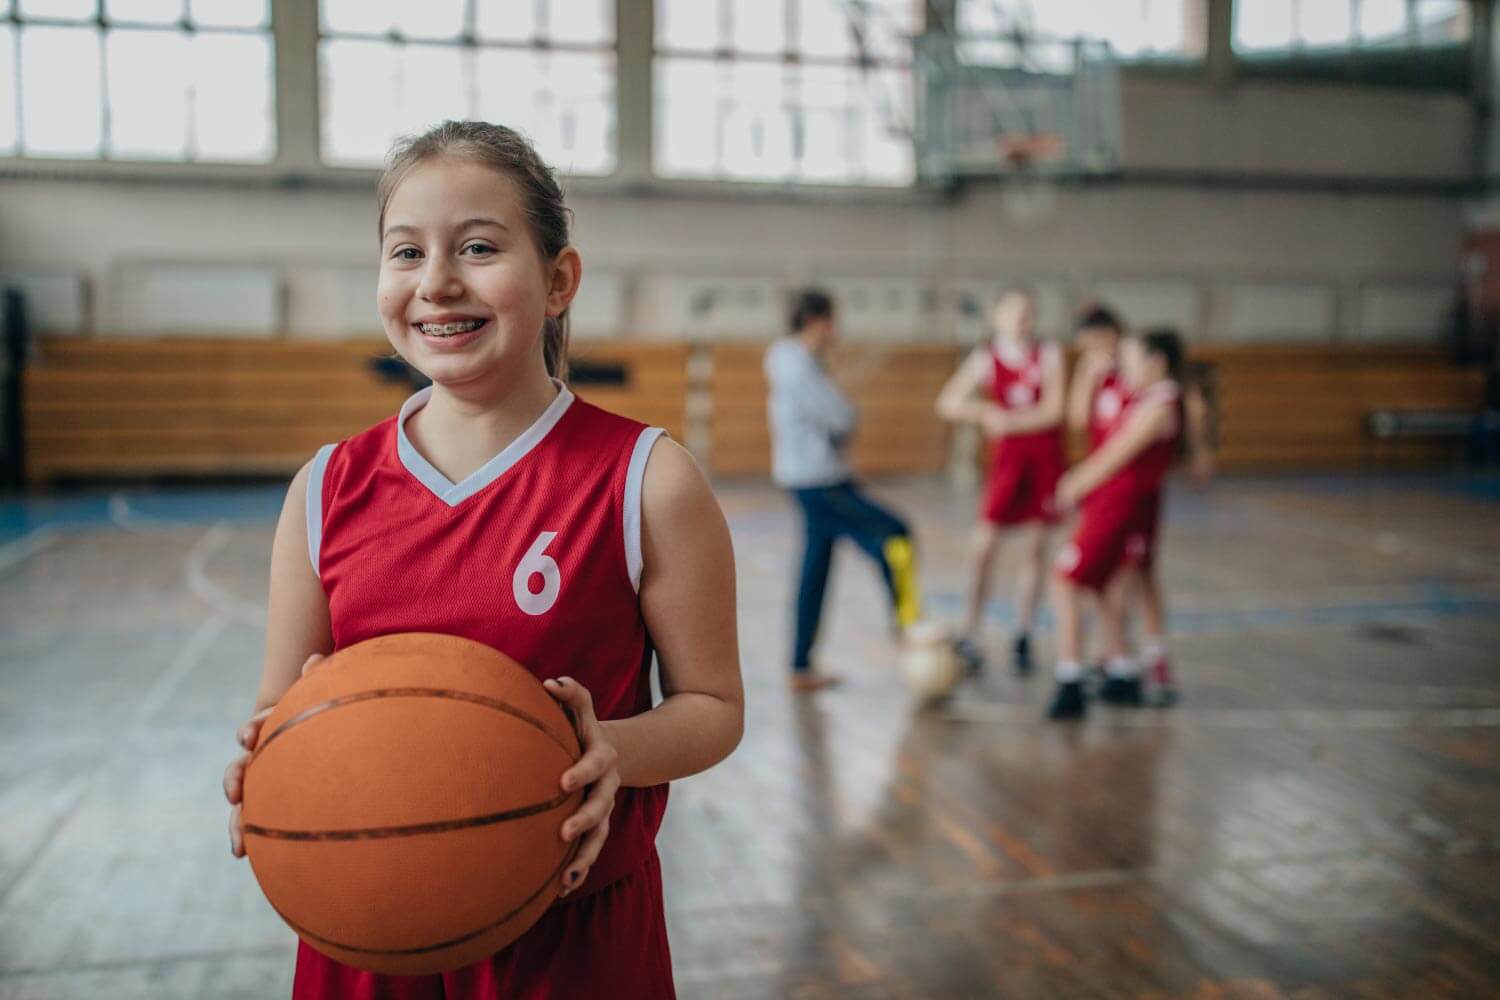 Young girl in a red jersey holds a basketball while wearing braces inside on a basketball court